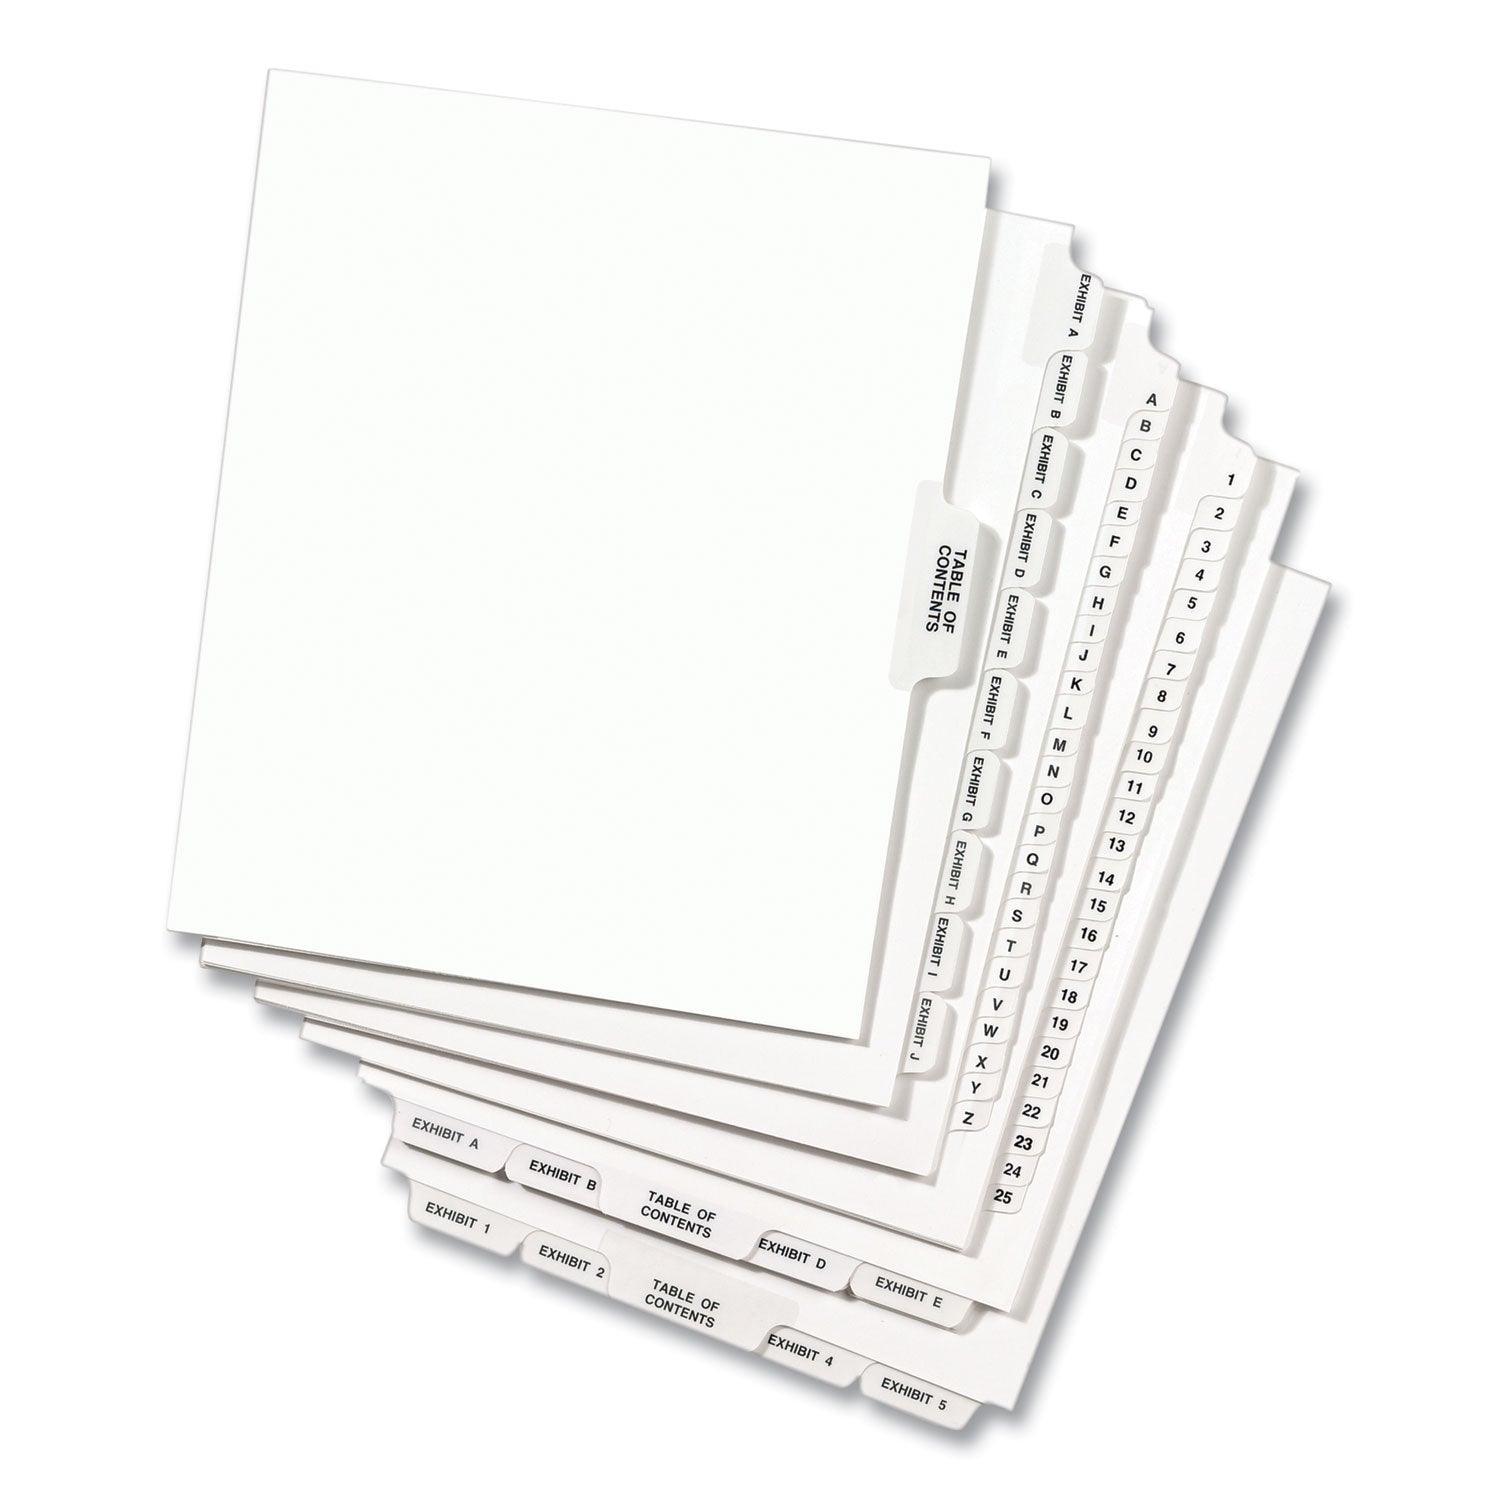 Preprinted Legal Exhibit Side Tab Index Dividers, Avery Style, 10-Tab, 17, 11 x 8.5, White, 25/Pack, (1017) - 